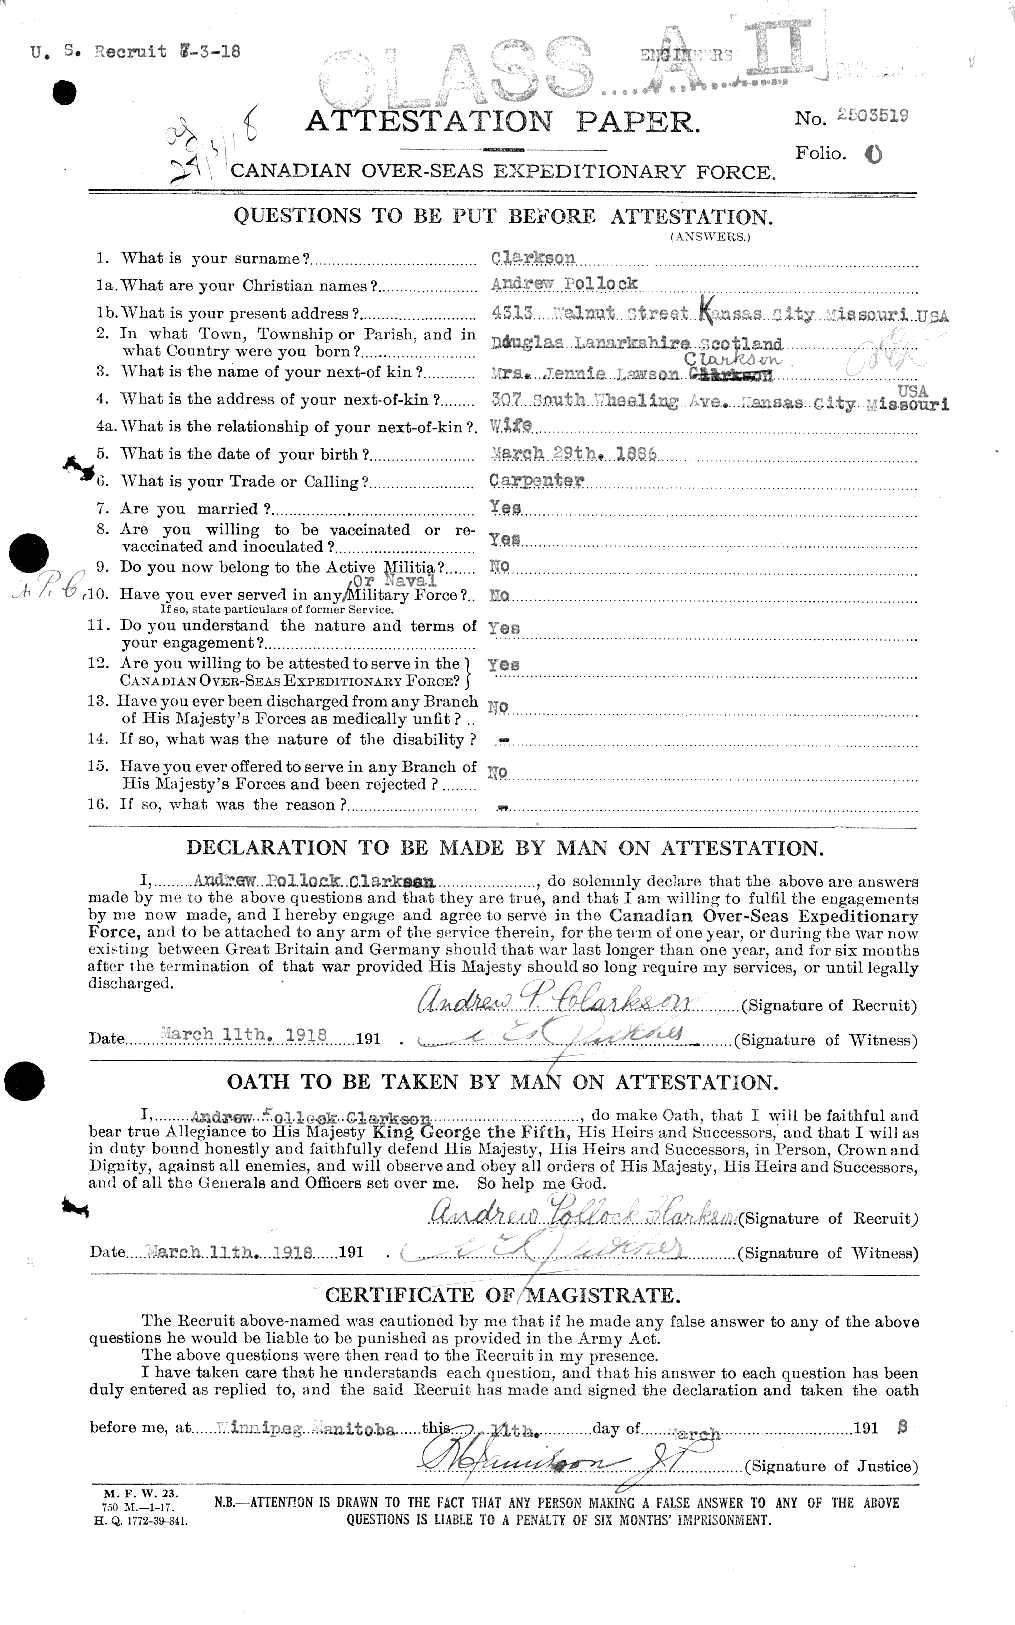 Personnel Records of the First World War - CEF 023614a